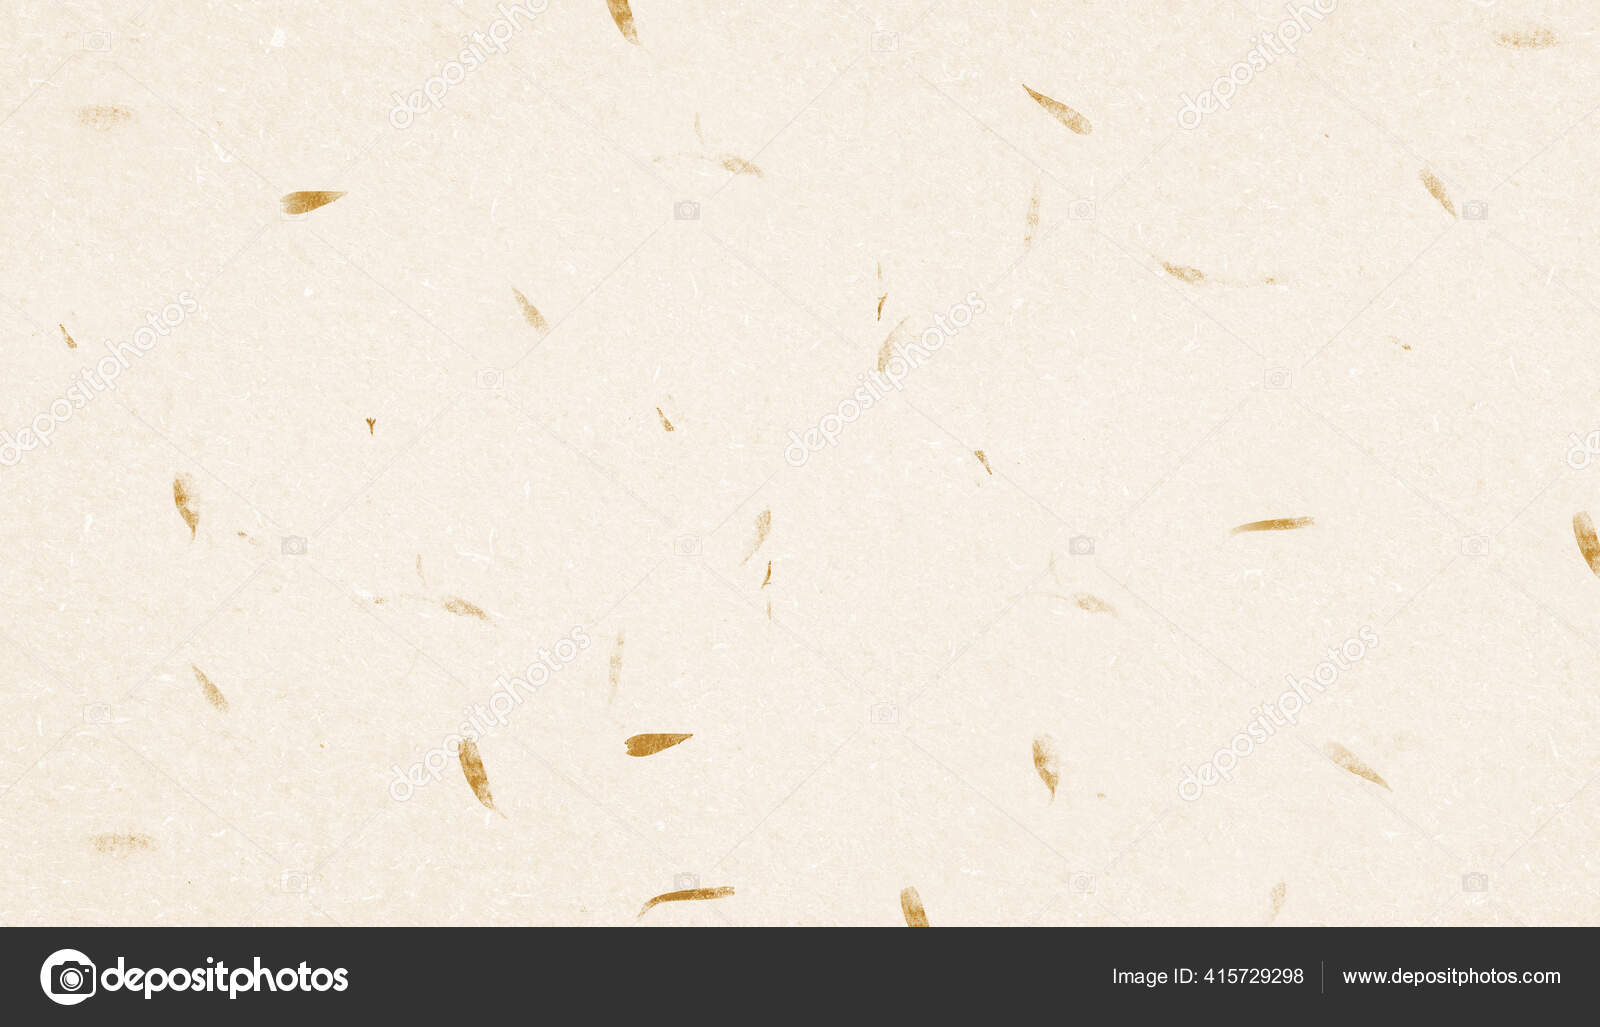 Pale Yellow Mulberry Paper Leaf Texture Background Handmade Paper